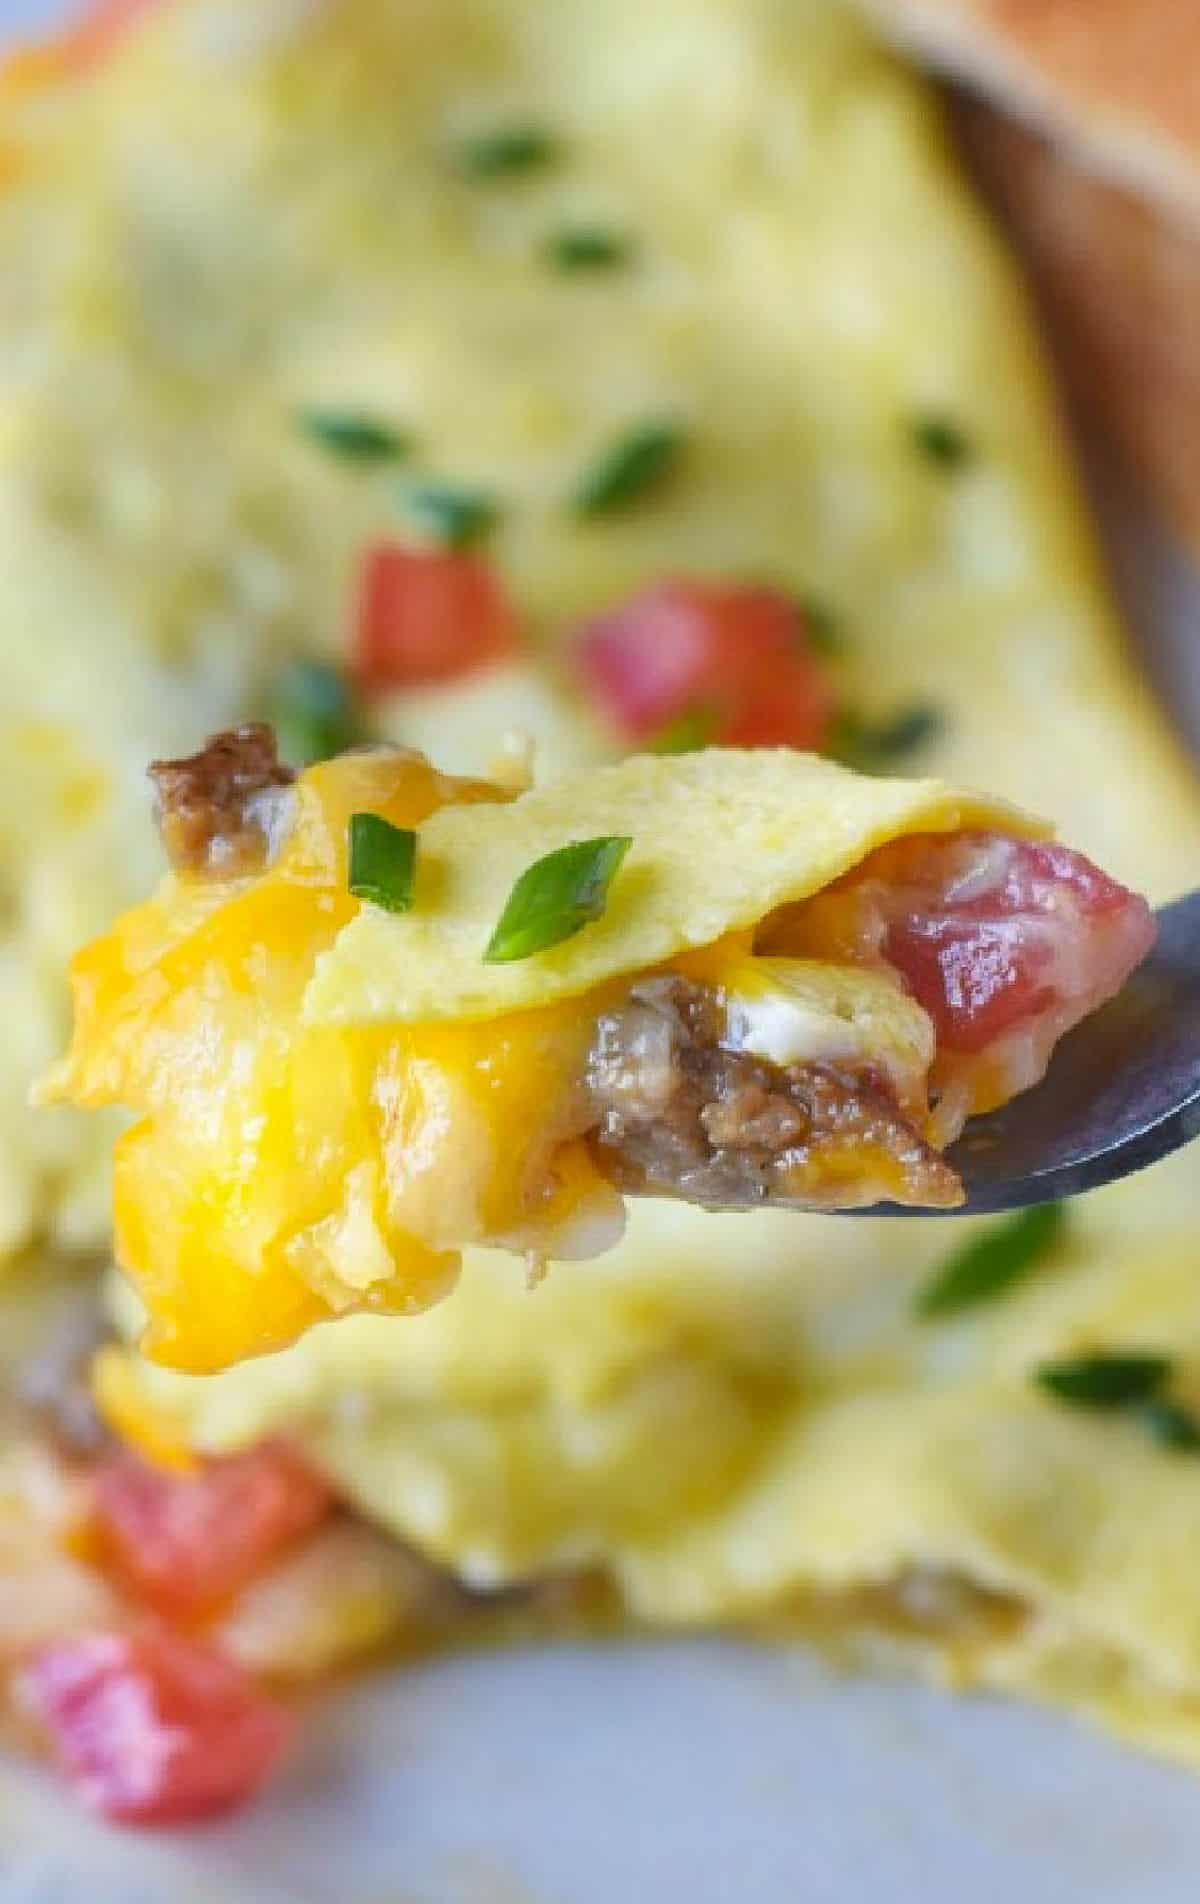 A bite of a sausage omelet on a fork.